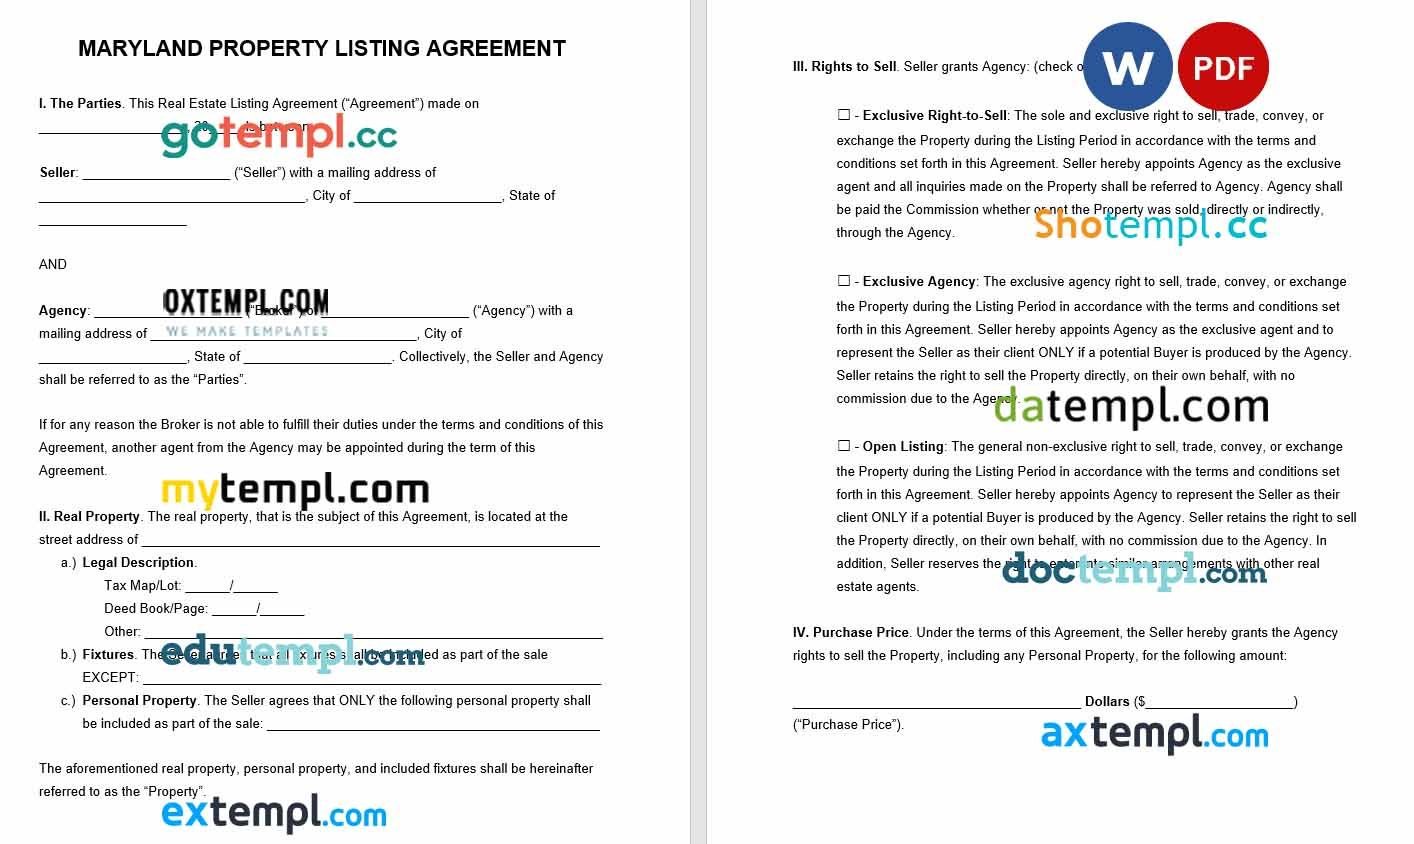 Maryland Real Estate Listing Agreement Word example, fully editable